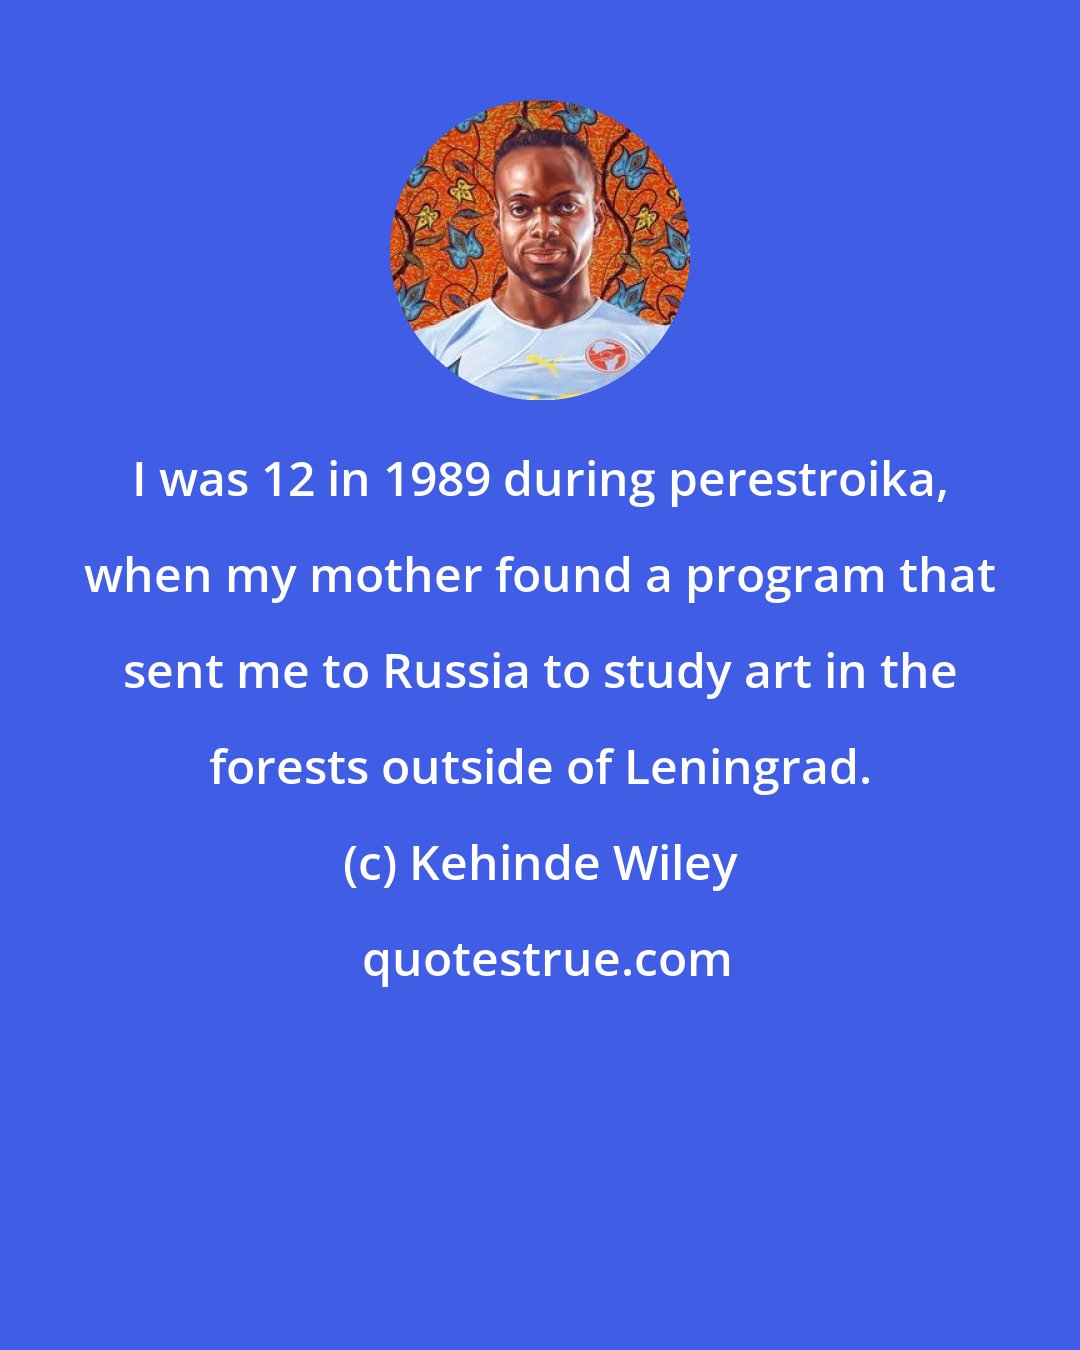 Kehinde Wiley: I was 12 in 1989 during perestroika, when my mother found a program that sent me to Russia to study art in the forests outside of Leningrad.